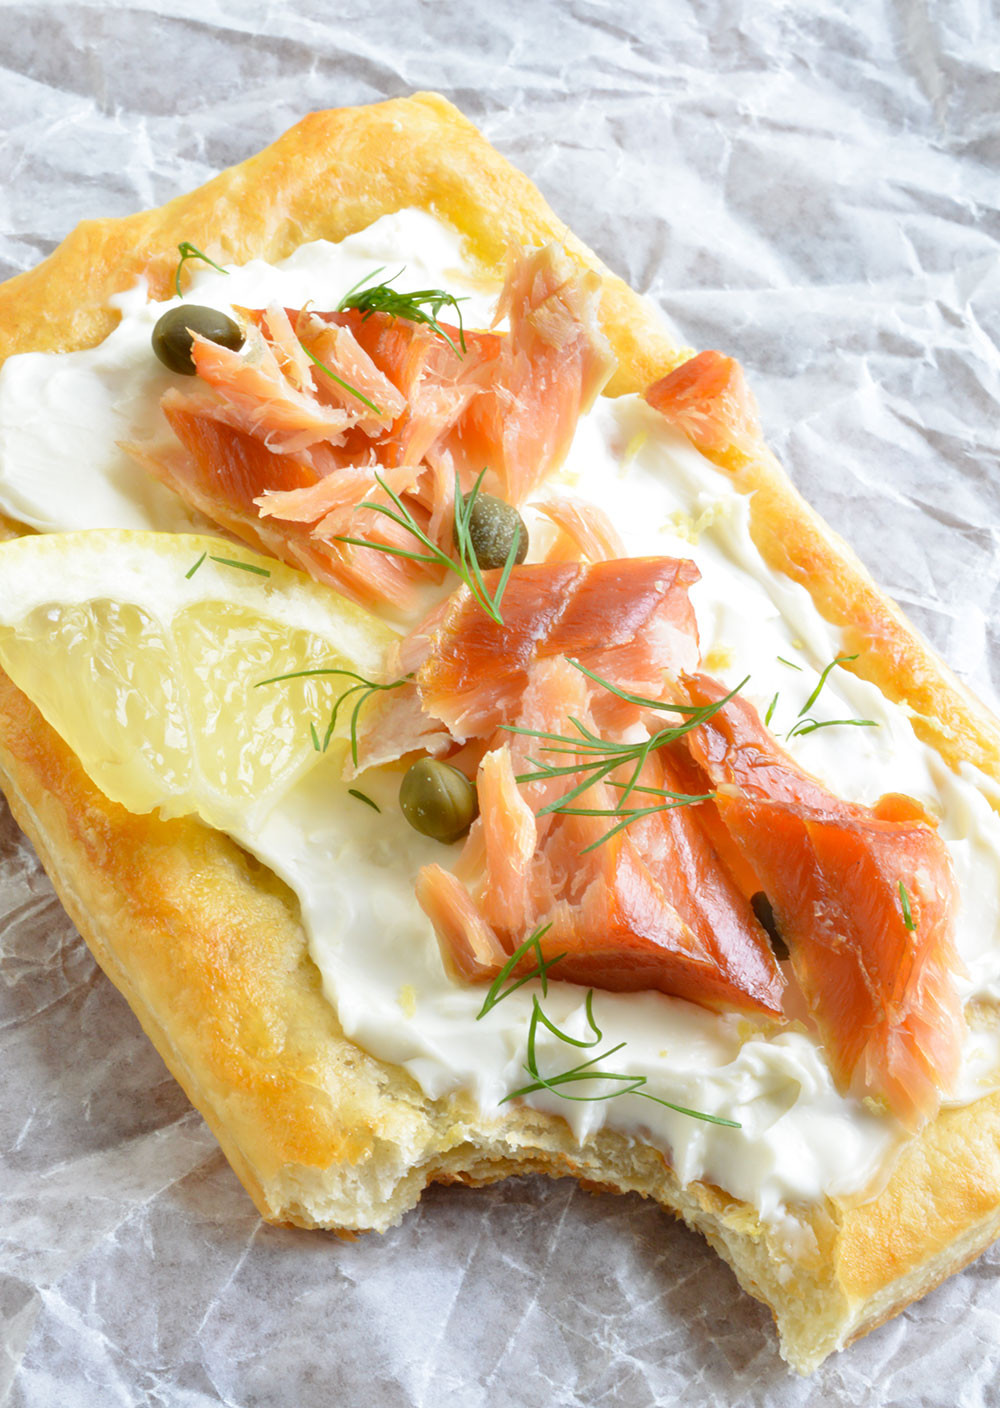 Cream Cheese Recipes Appetizers
 smoked salmon and cream cheese recipes appetizers